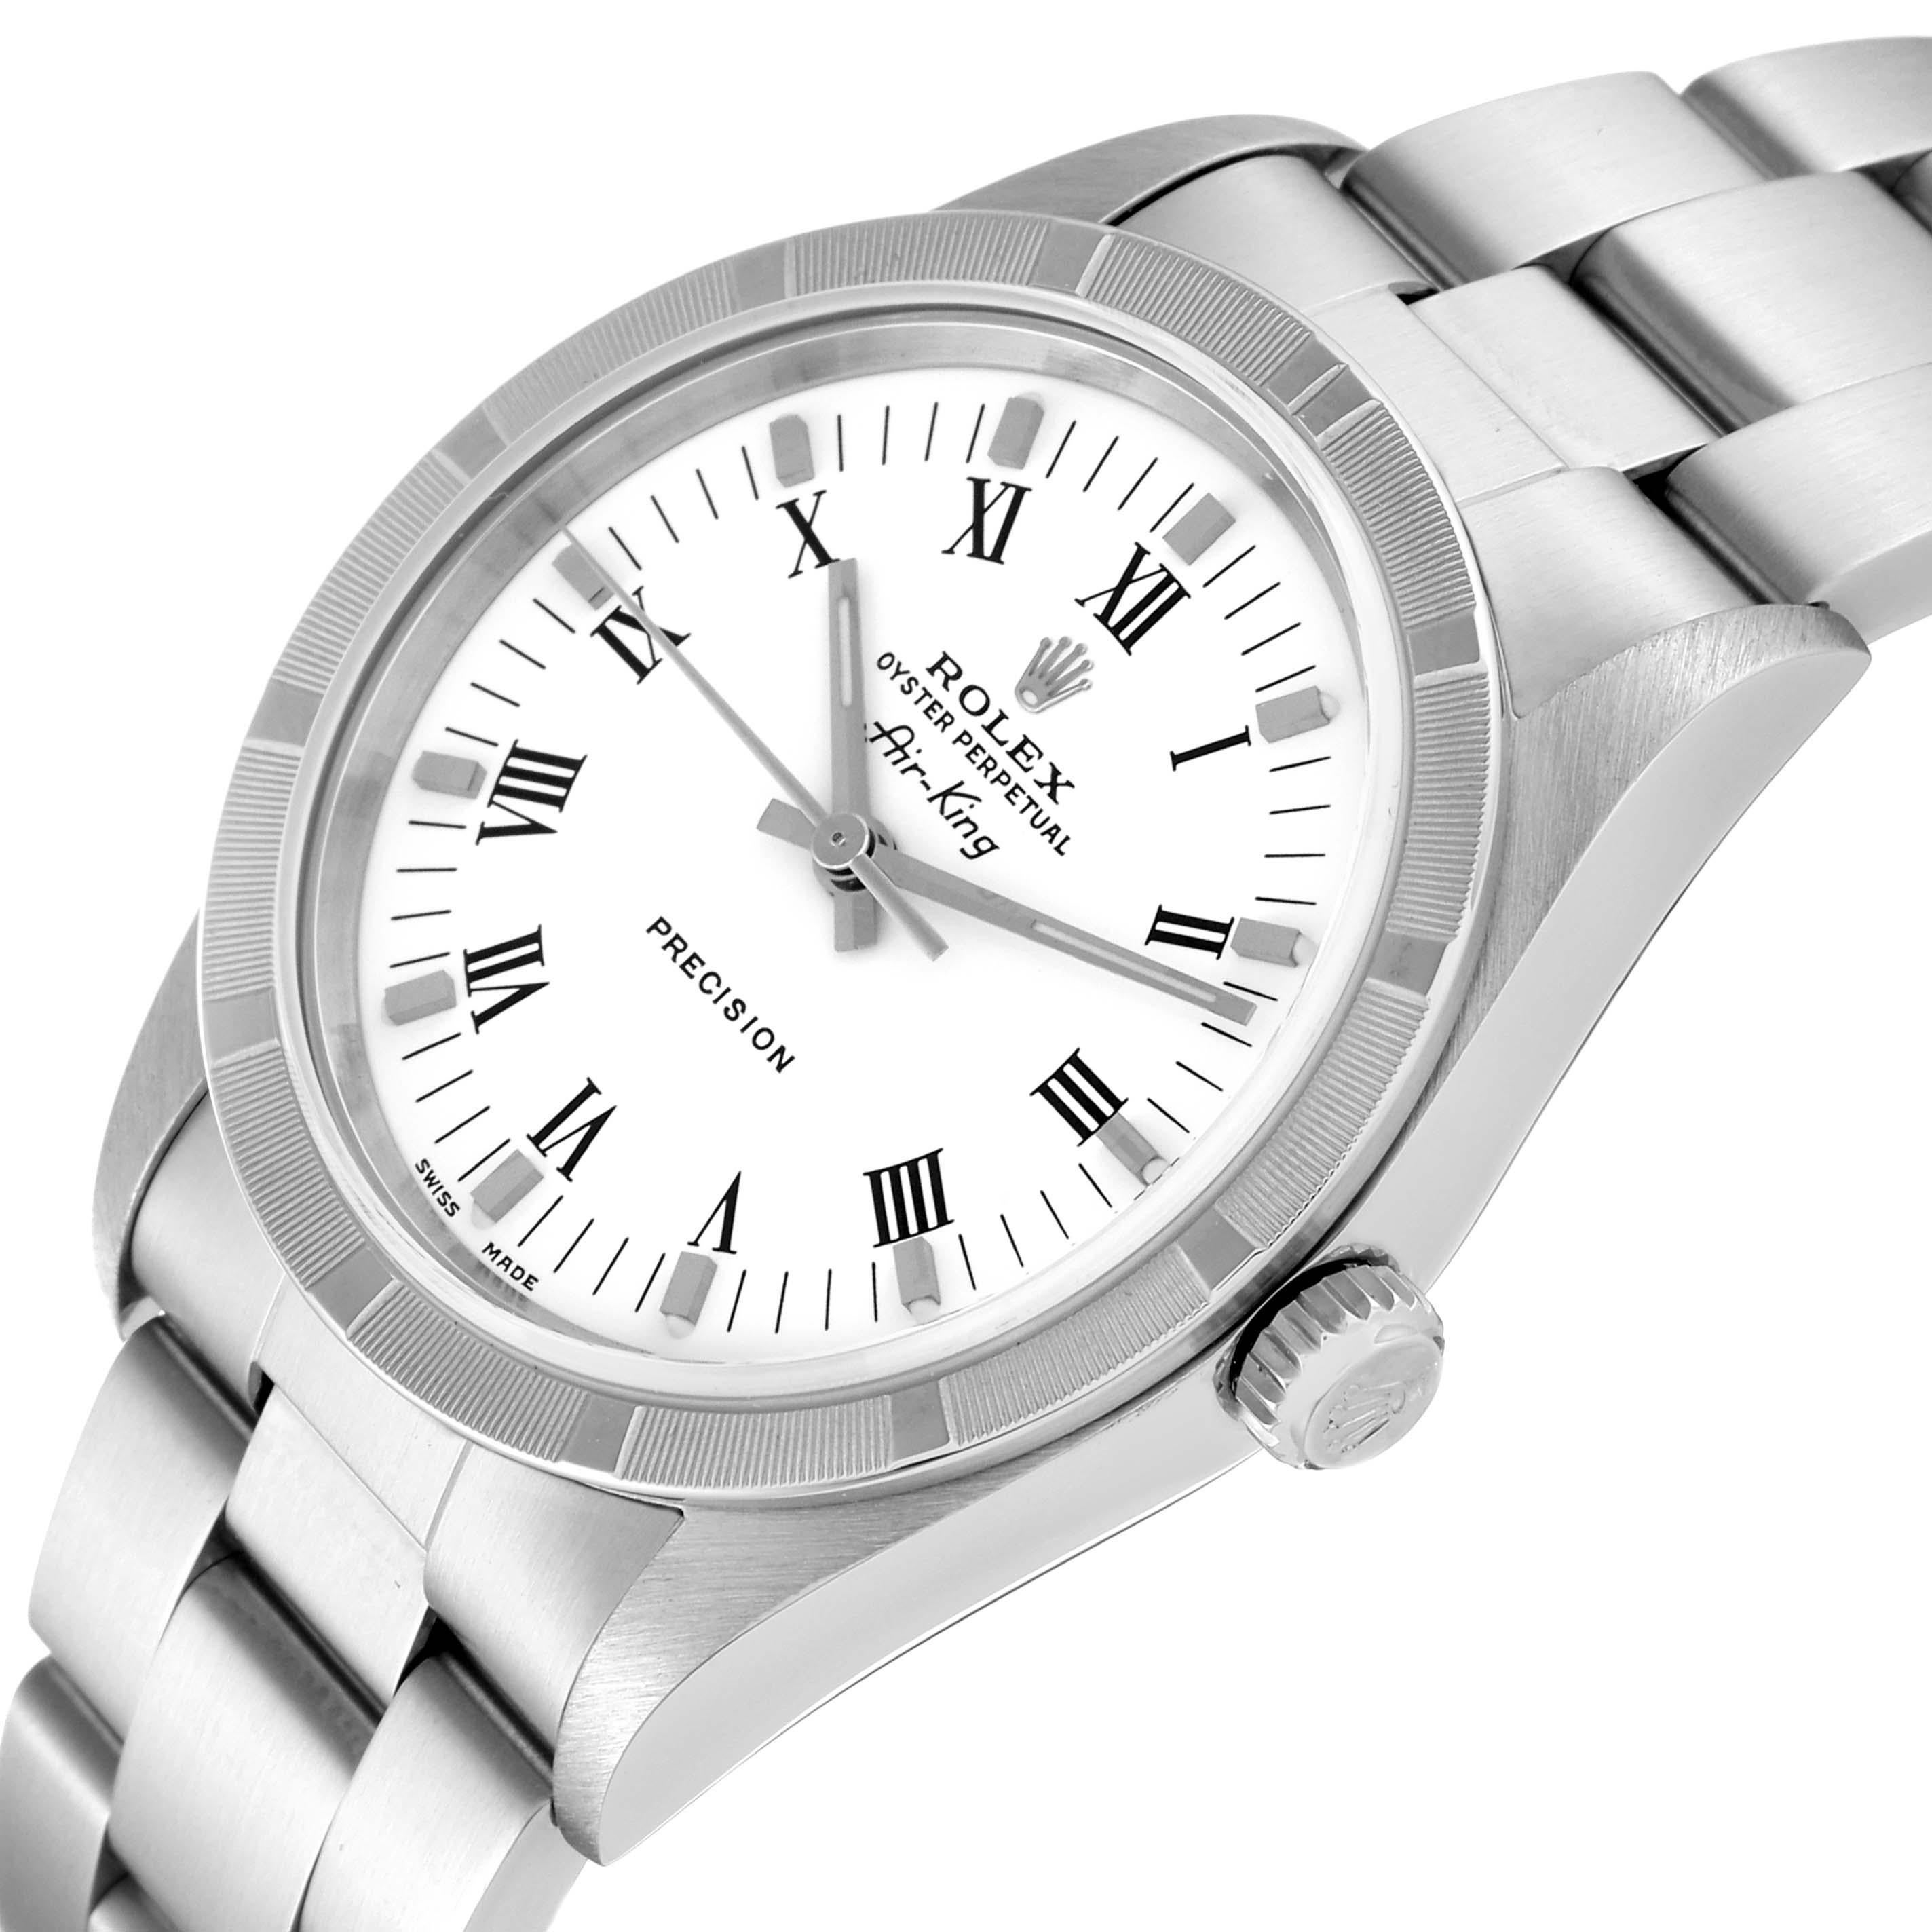 Rolex Air King 34mm White Roman Dial Steel Mens Watch 14010. Automatic self-winding movement. Stainless steel case 34.0 mm in diameter. Rolex logo on a crown. Stainless steel engine turned bezel. Scratch resistant sapphire crystal. White dial with